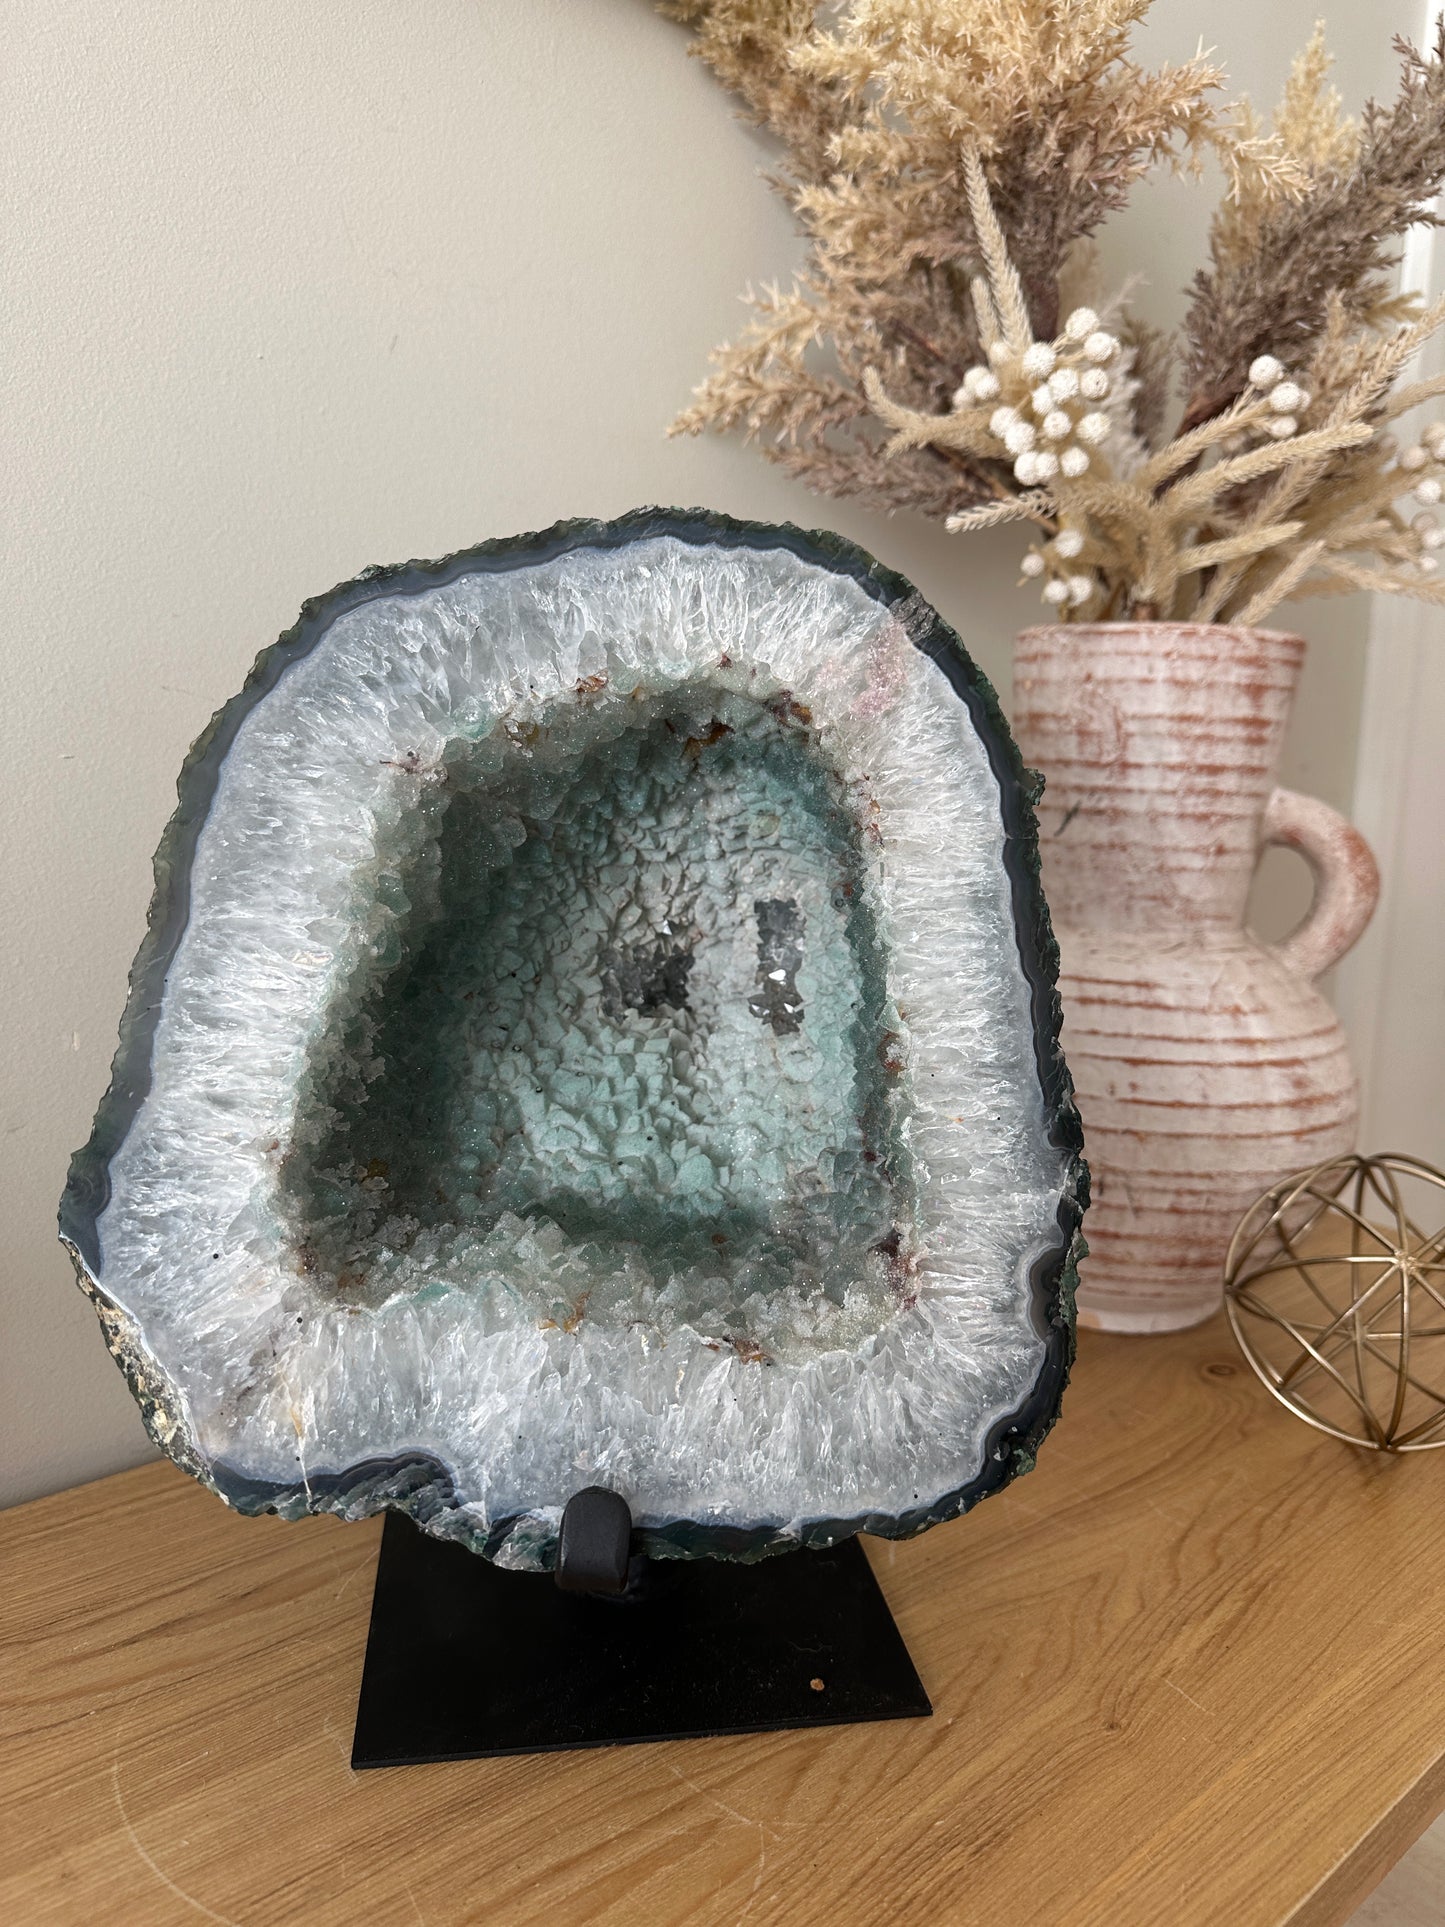 Collectors Piece Mint Green Candy Amethyst Geode formation on spinning stand